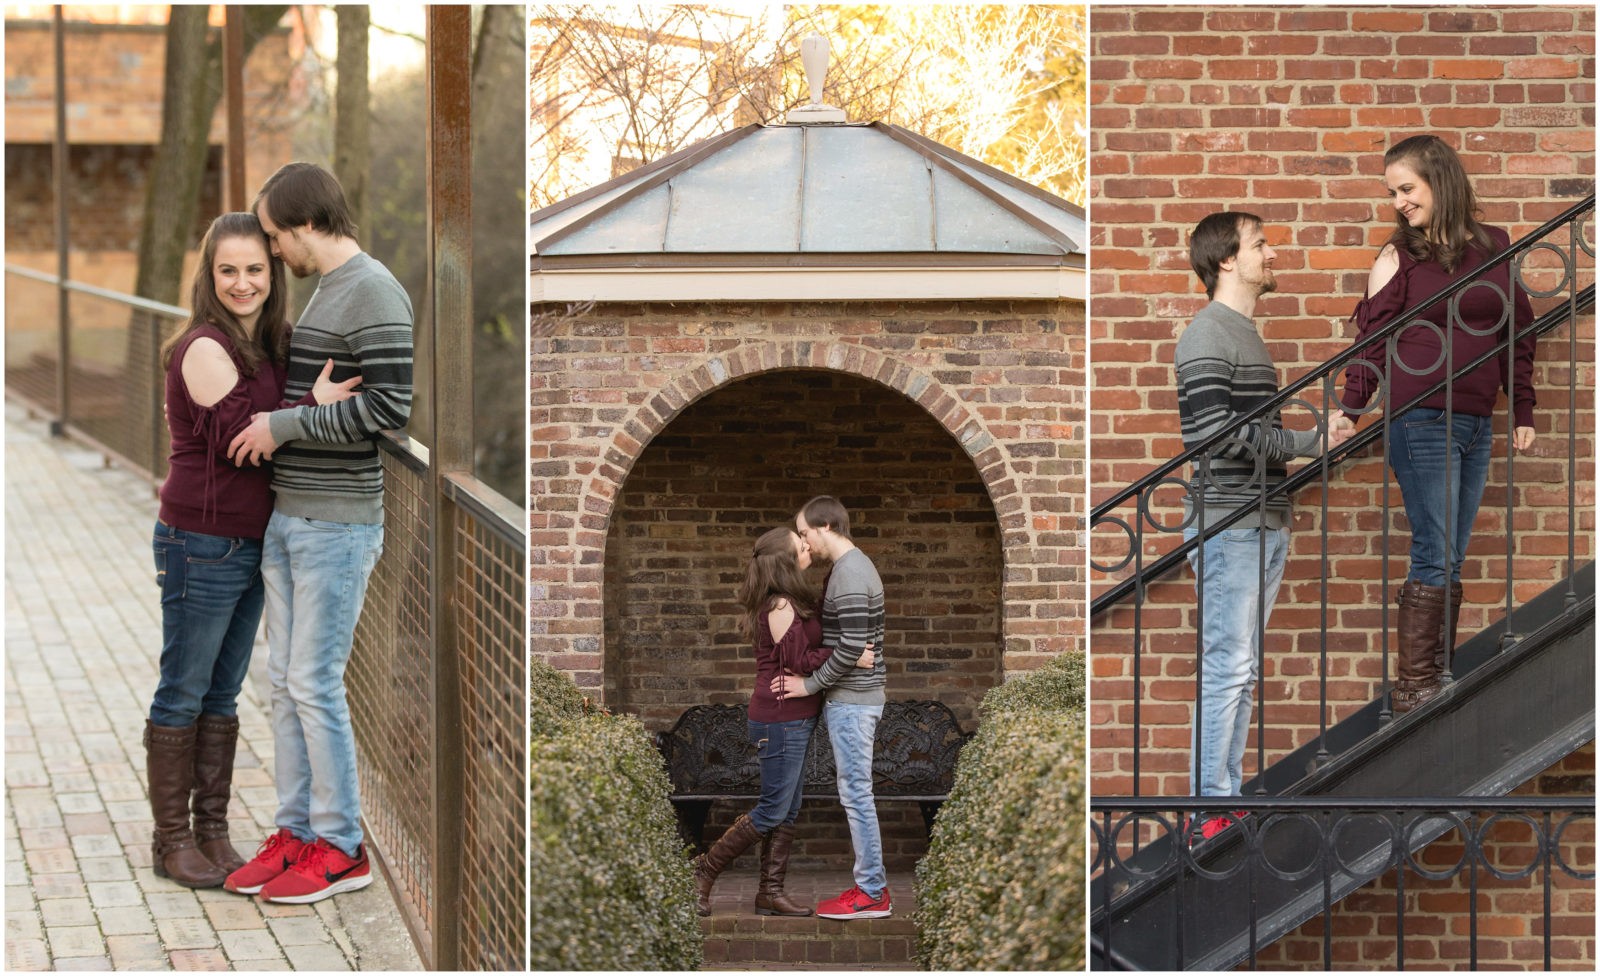 Rustic downtown winter engagement session at Gratz Park, Victorian Square, and Manchester Street in Lexington, Kentucky.